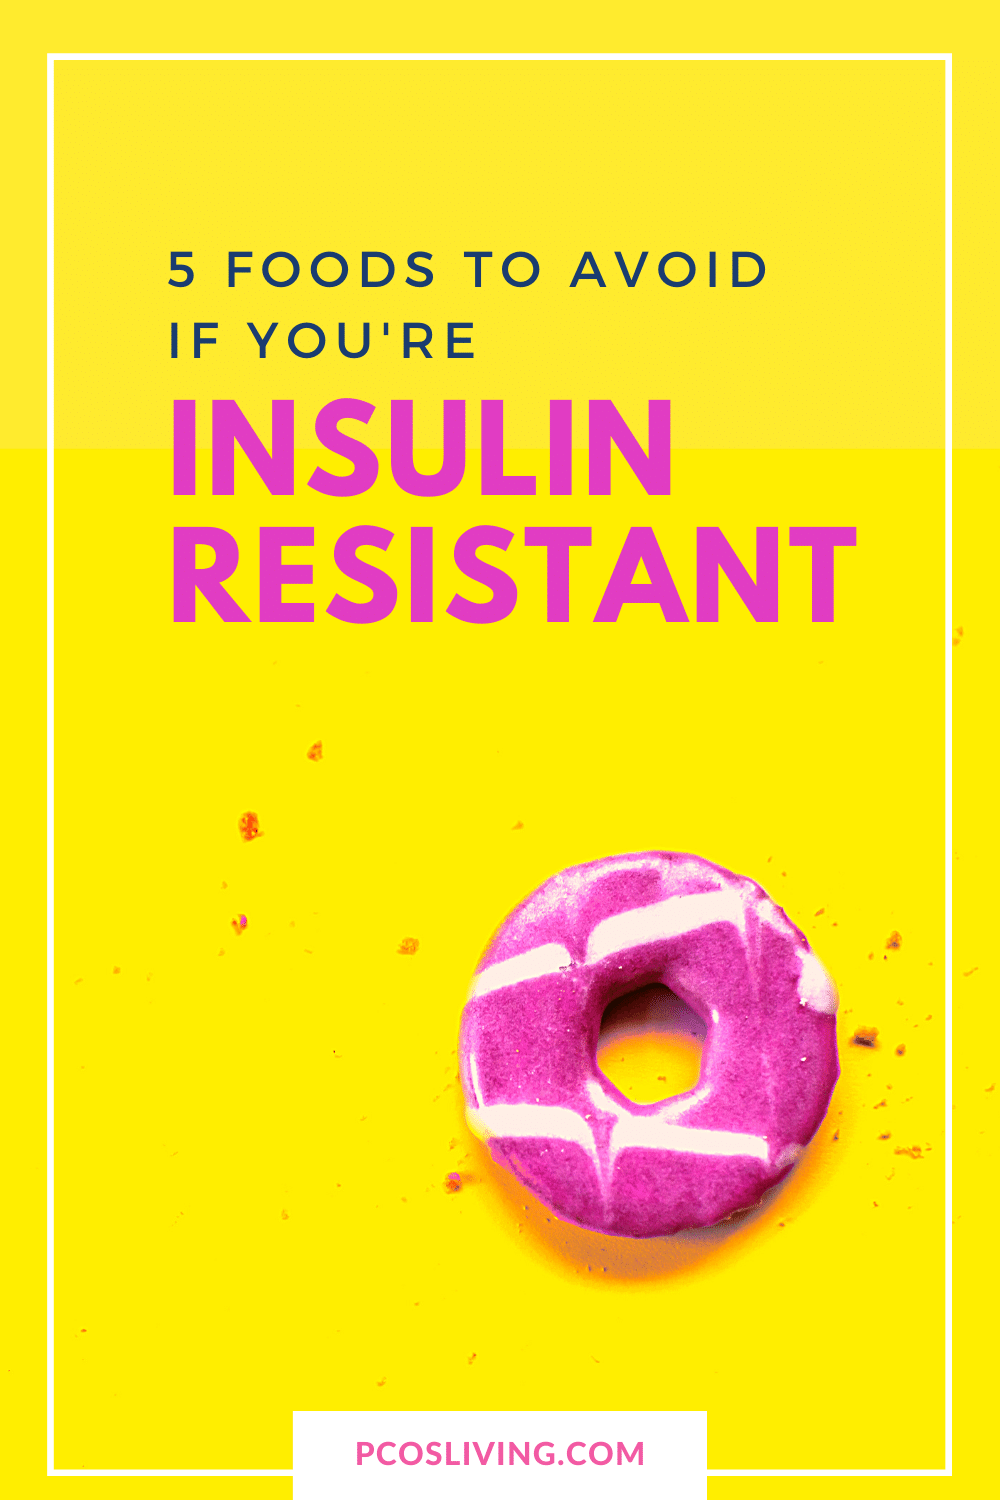 Pinterest 5 foods to cut if you are insulin resistant _ PCOSLiving.com.png